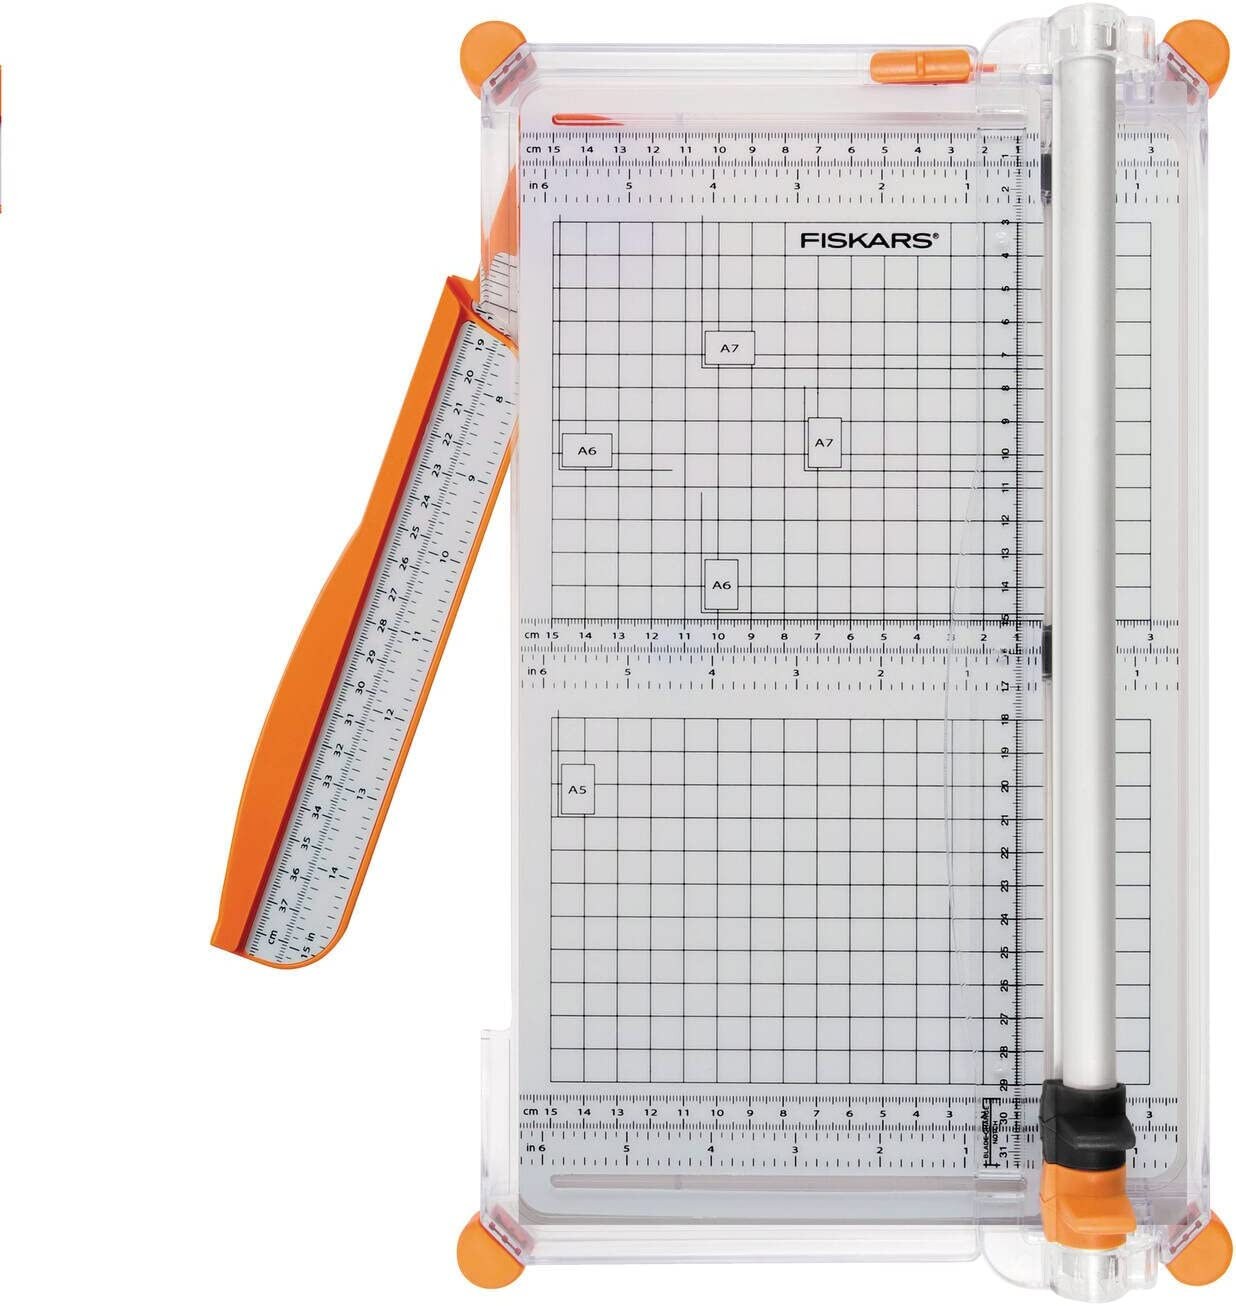 Fiskars 12 Cutter Small Paper Trimmer Paper Crafting Tool , Scrapbooking,  Photo Album Card Making Stamping Projects Ruled 